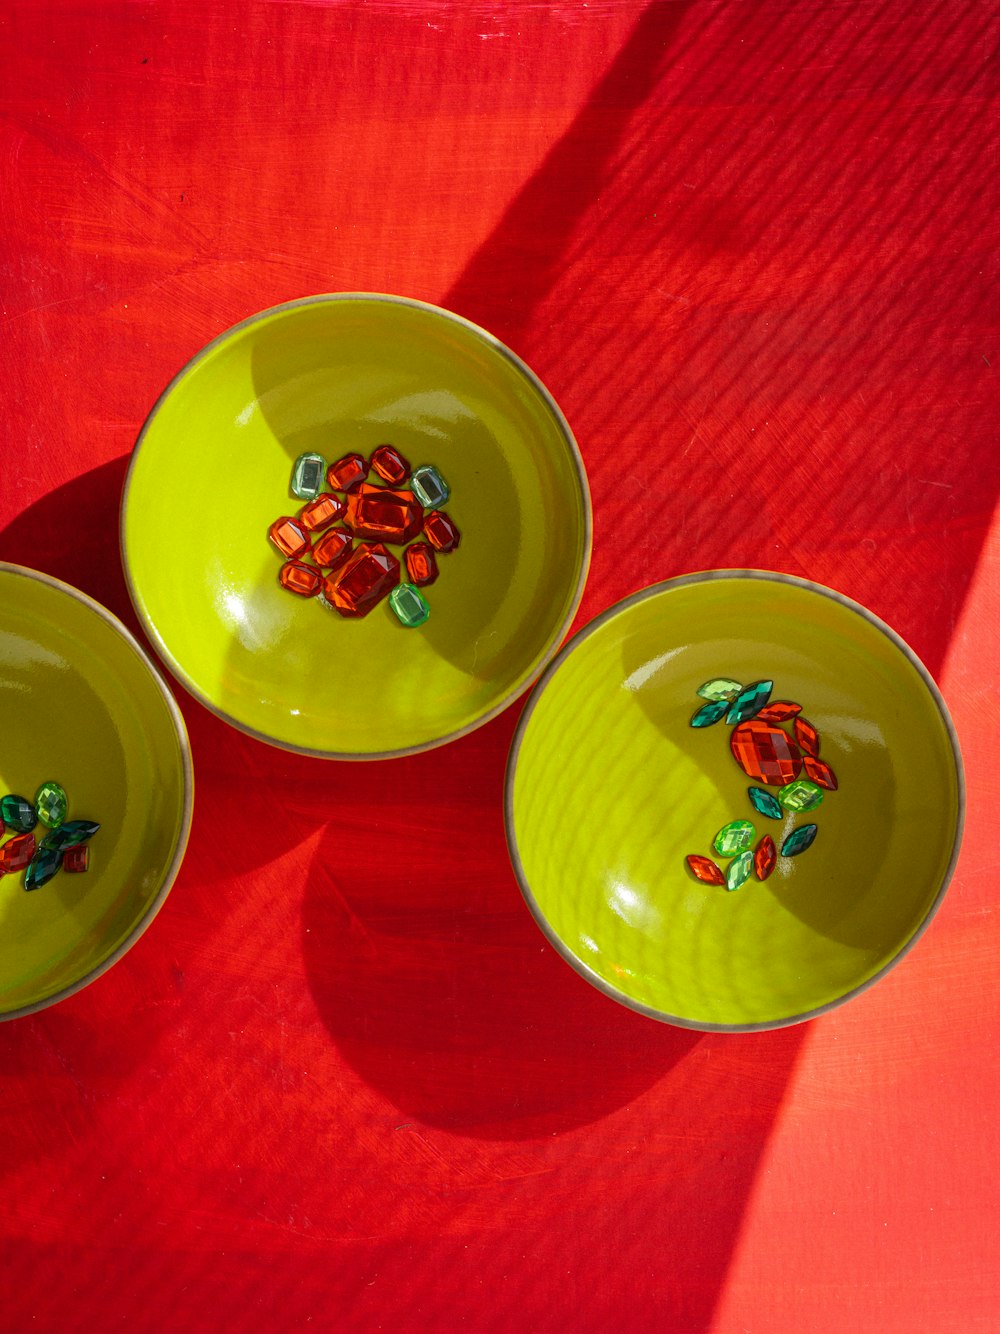 three yellow bowls with designs on them on a red surface